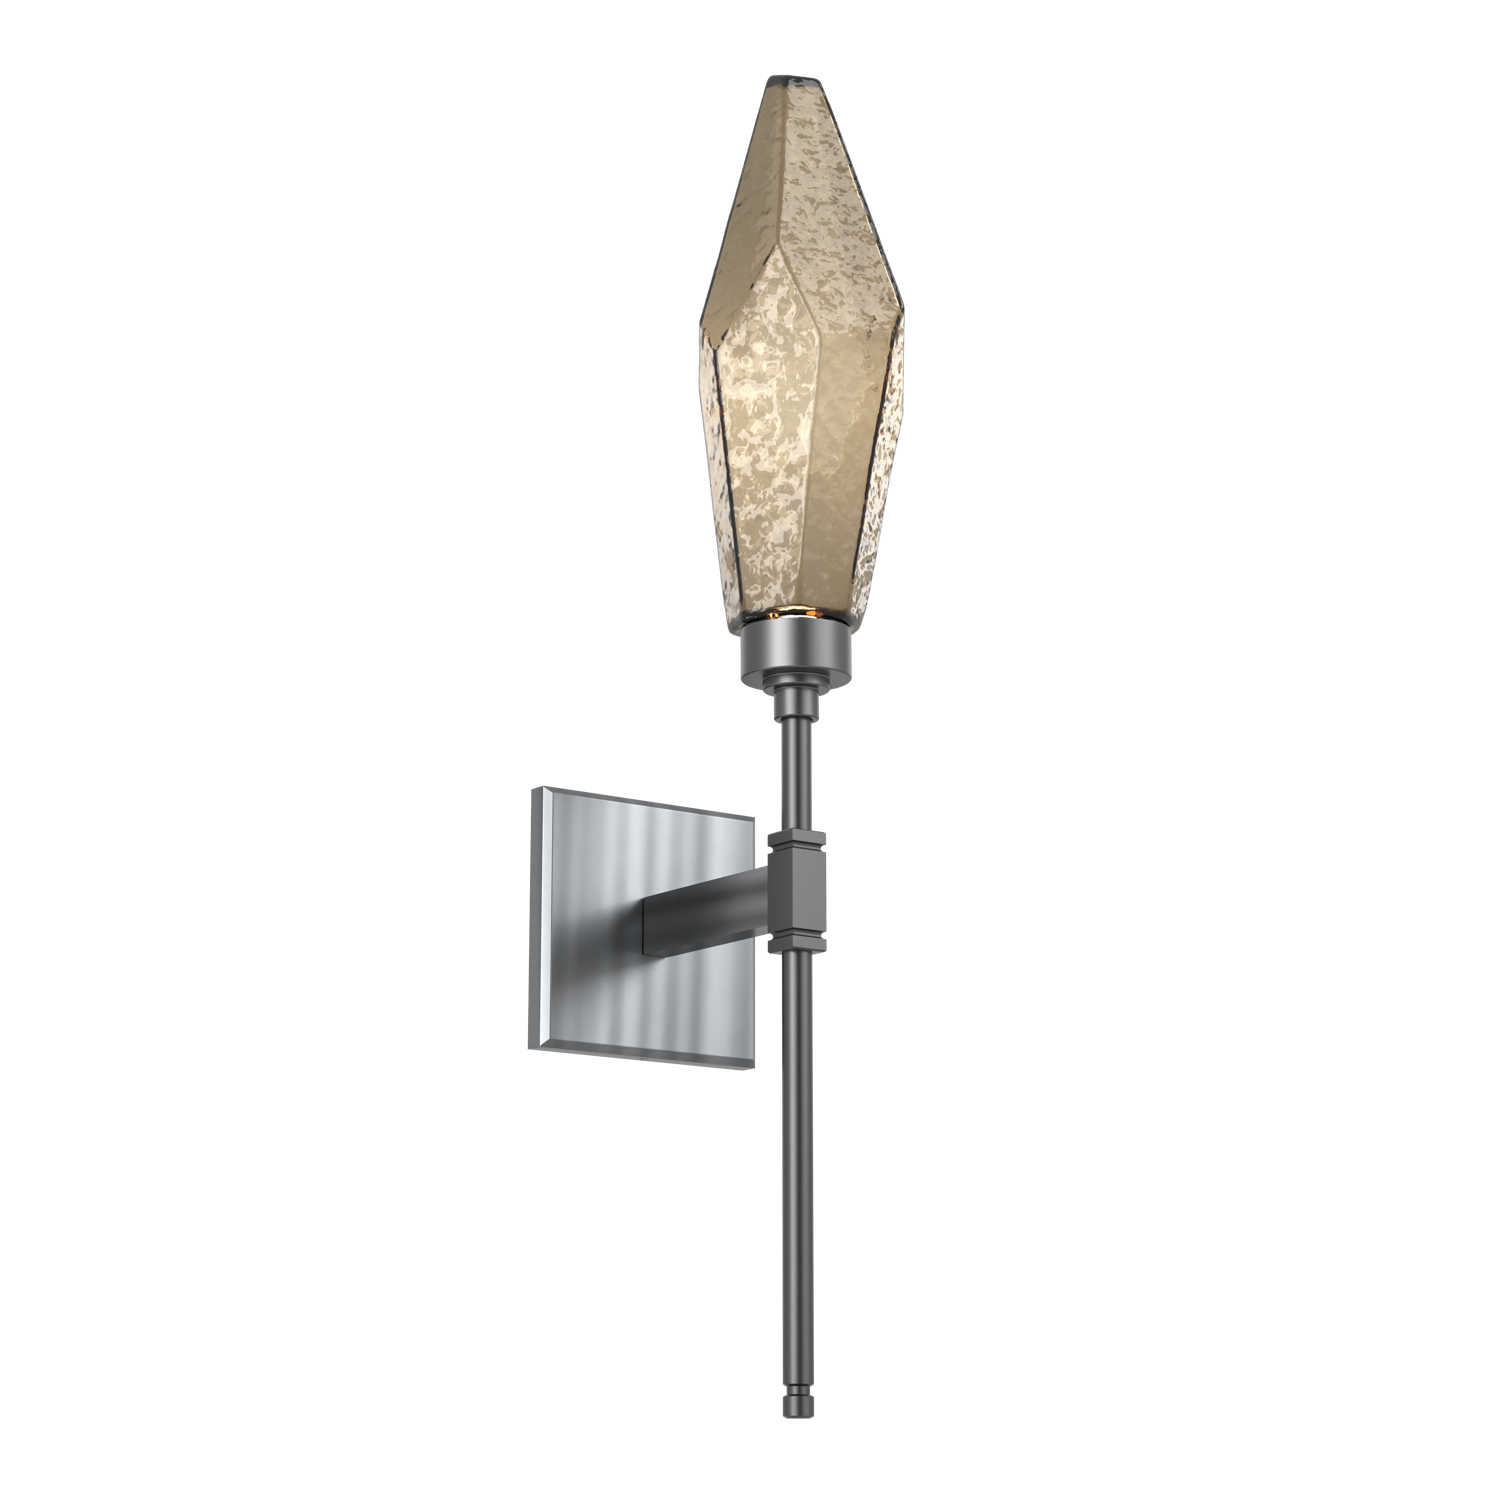 IDB0050-07-GM-CB-Hammerton-Studio-Rock-Crystal-belvedere-wall-sconce-with-gunmetal-finish-and-chilled-bronze-blown-glass-shades-and-LED-lamping